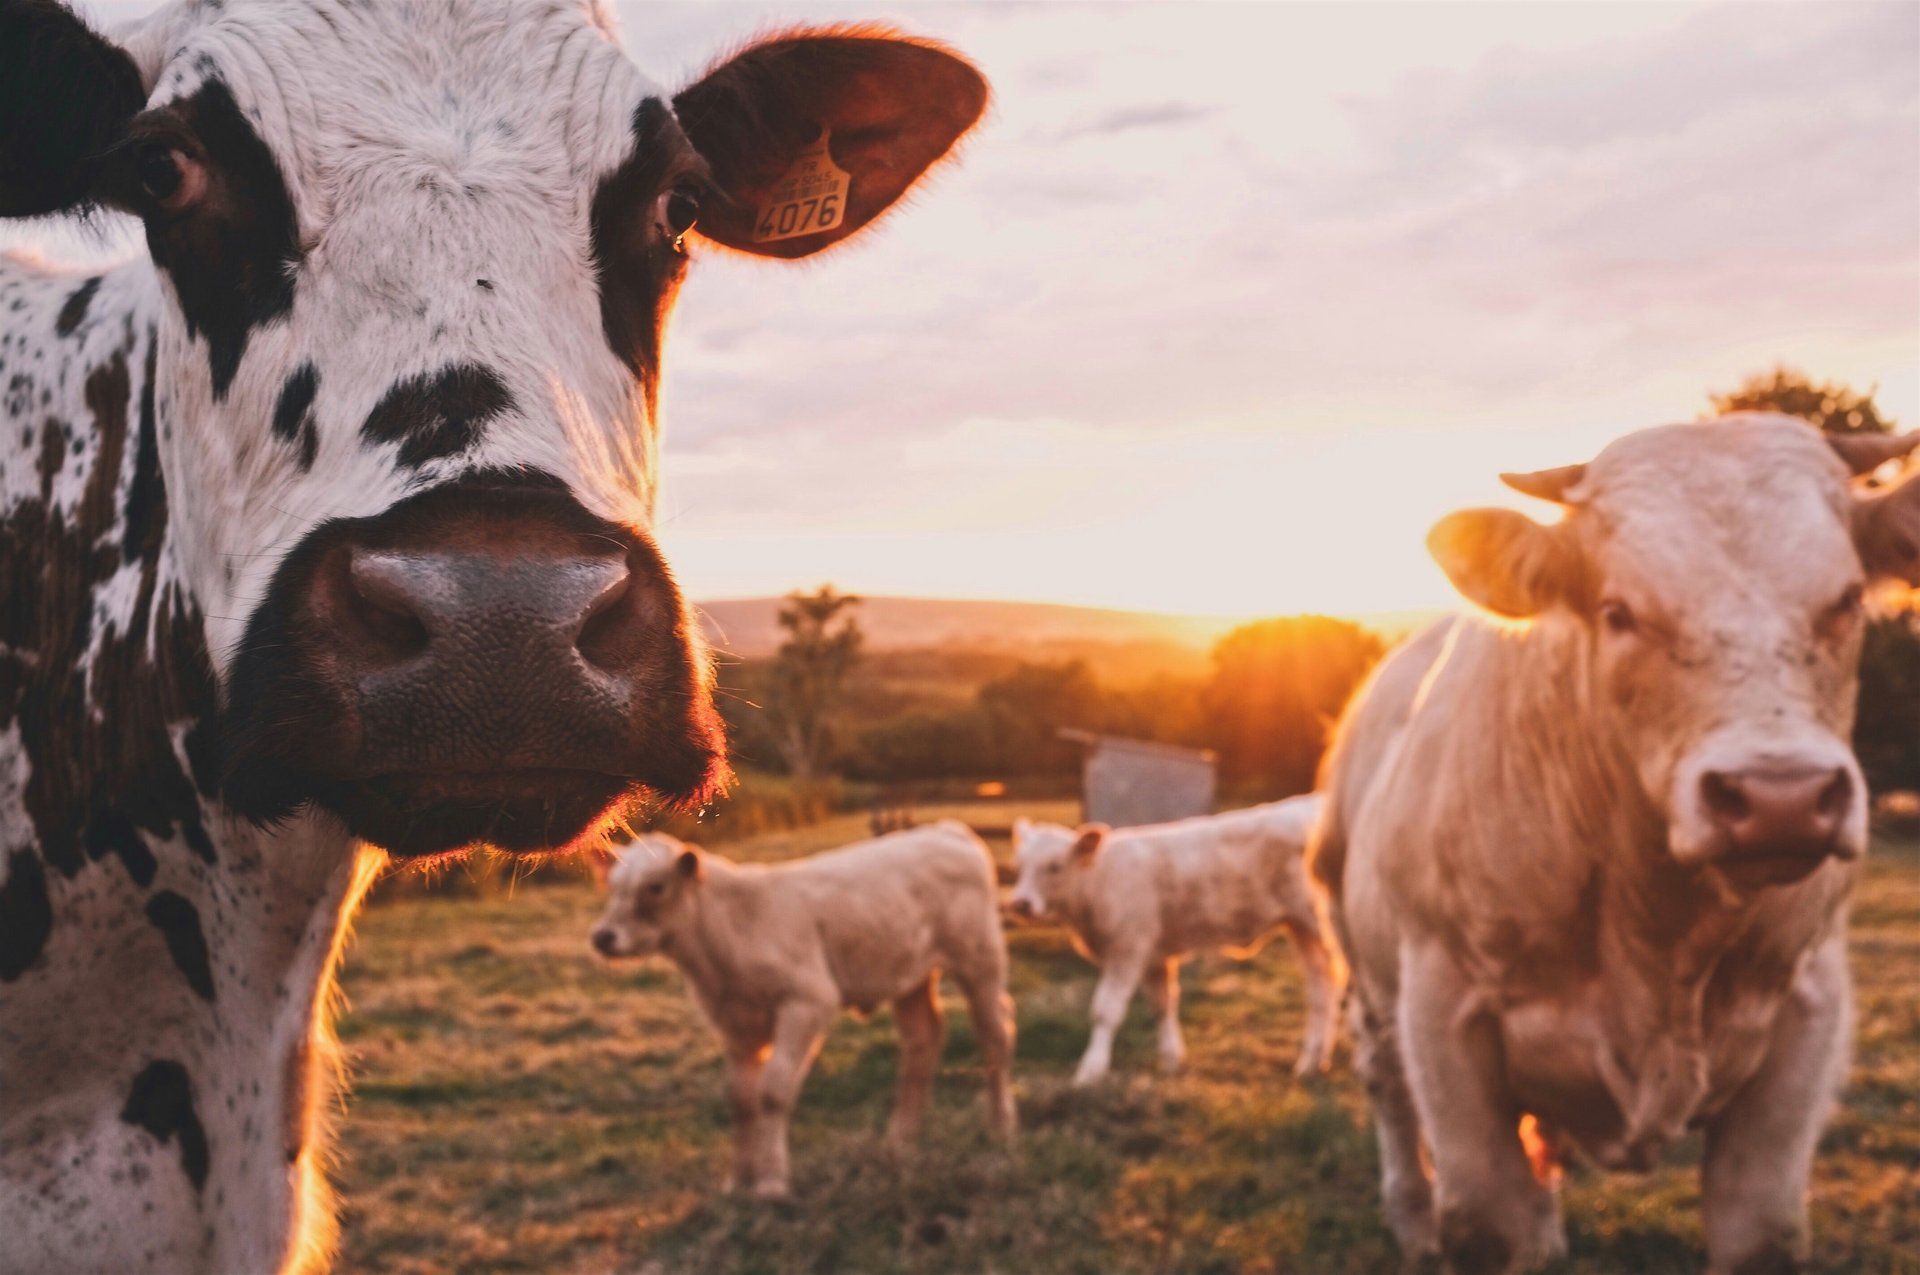 A herd of cows standing in a field at sunset.